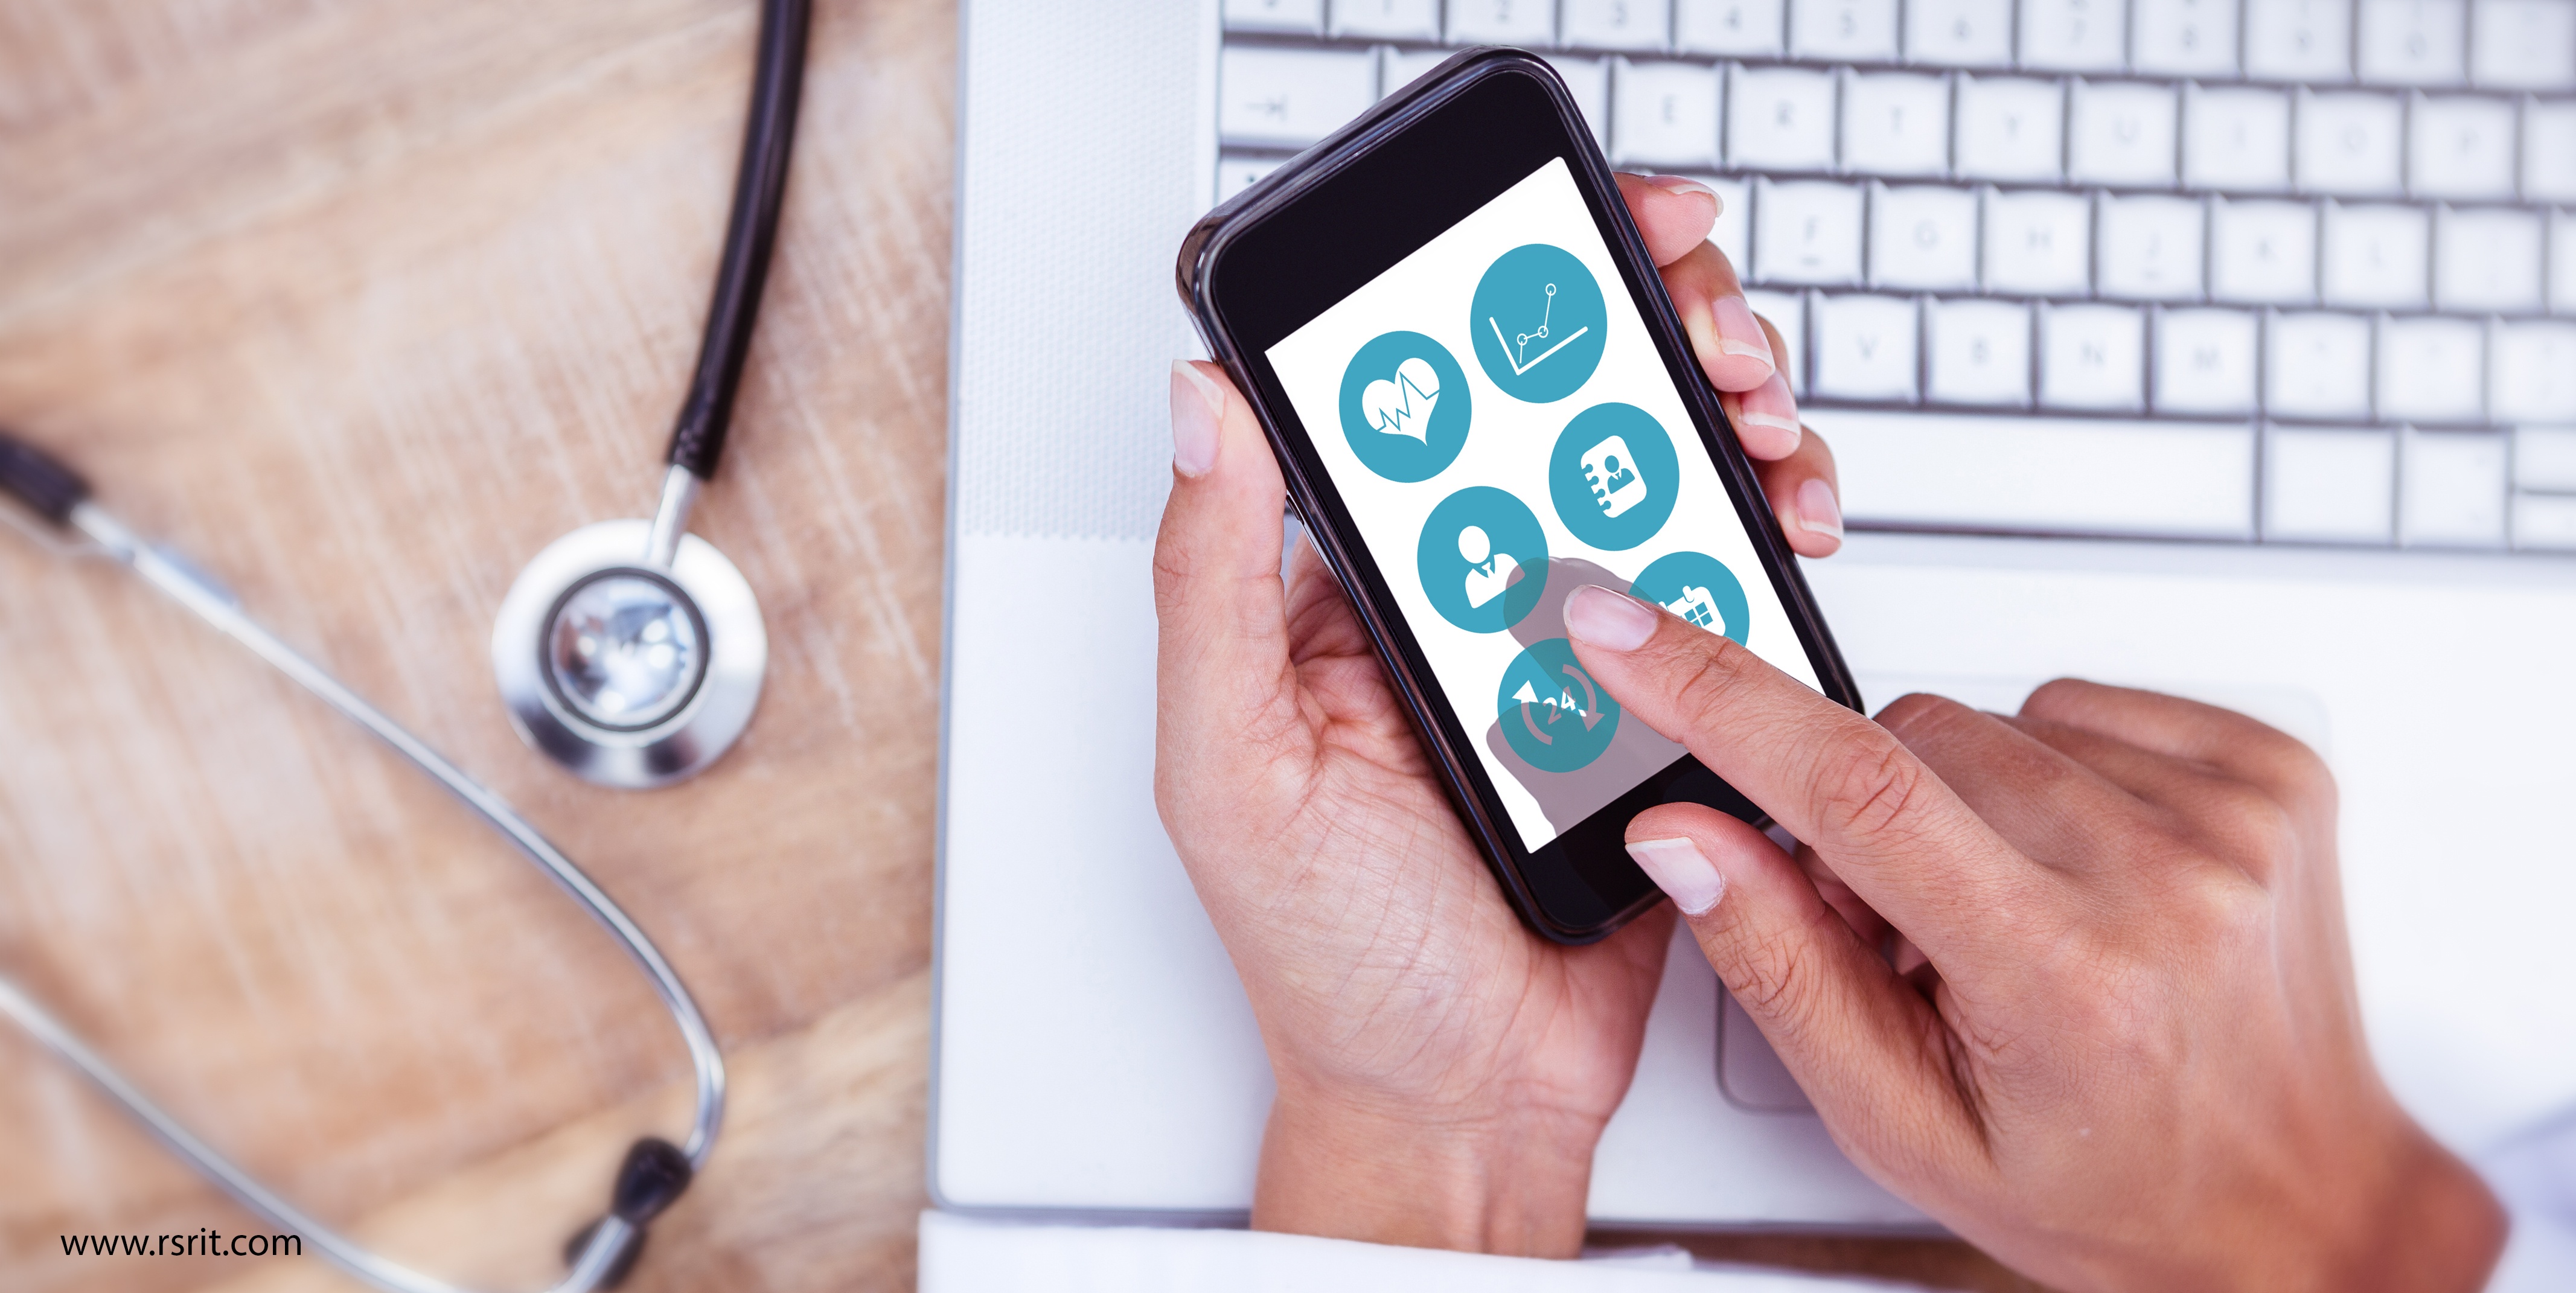 Digital Health Research Driven by Mobile Technology